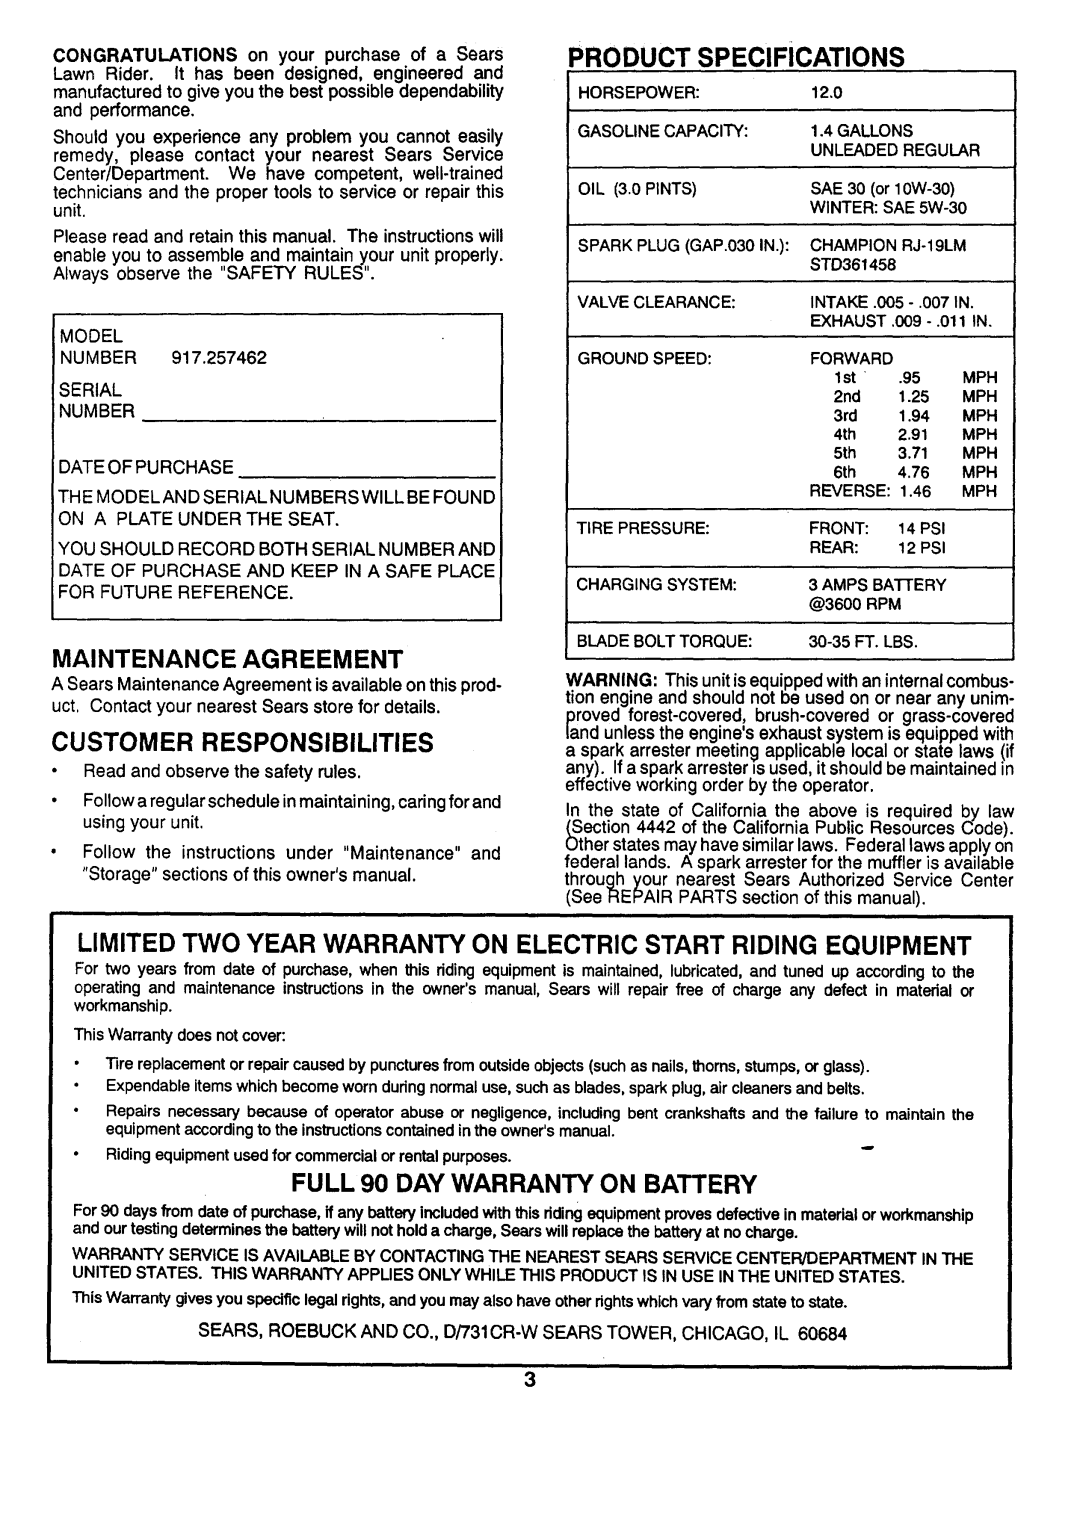 Sears 917.257462 Customer Responsibilities, Product Specifications, FULL 90 DAY WARRANTY ON BATTERY, Maintenance Agreement 